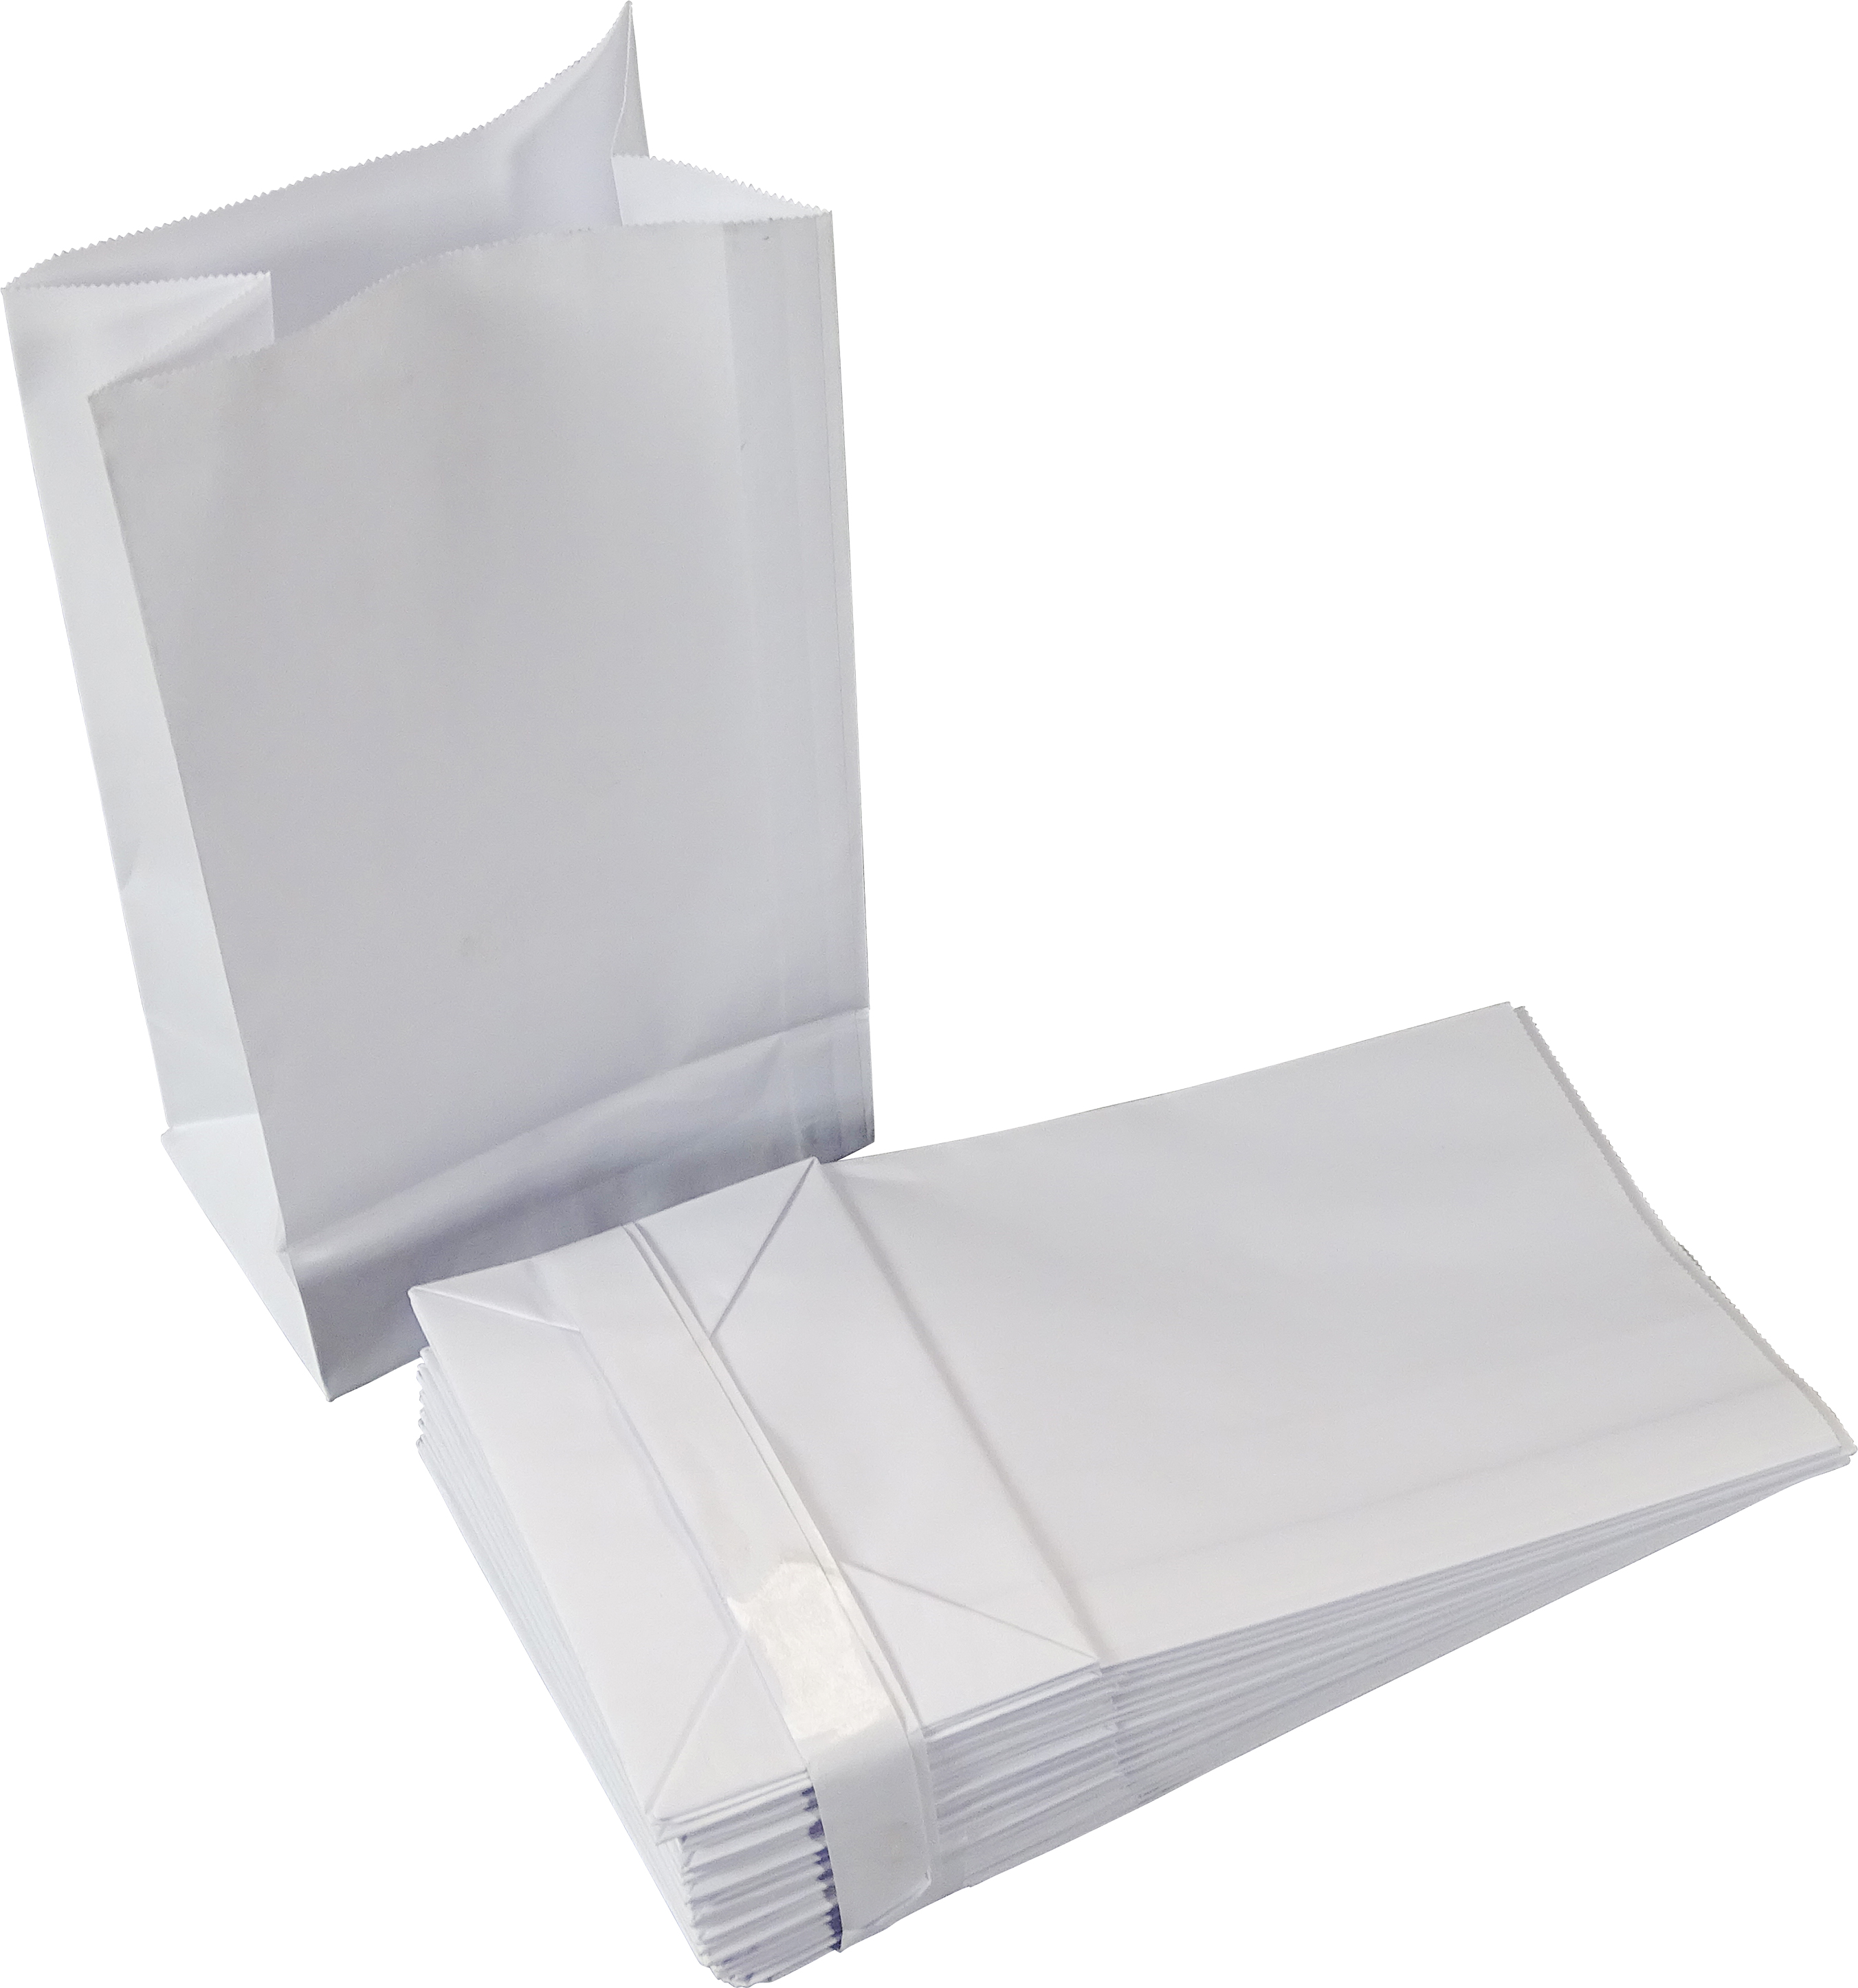 G245706 - Travel Sickness Bags - Pack of 100 | GLS Educational Supplies